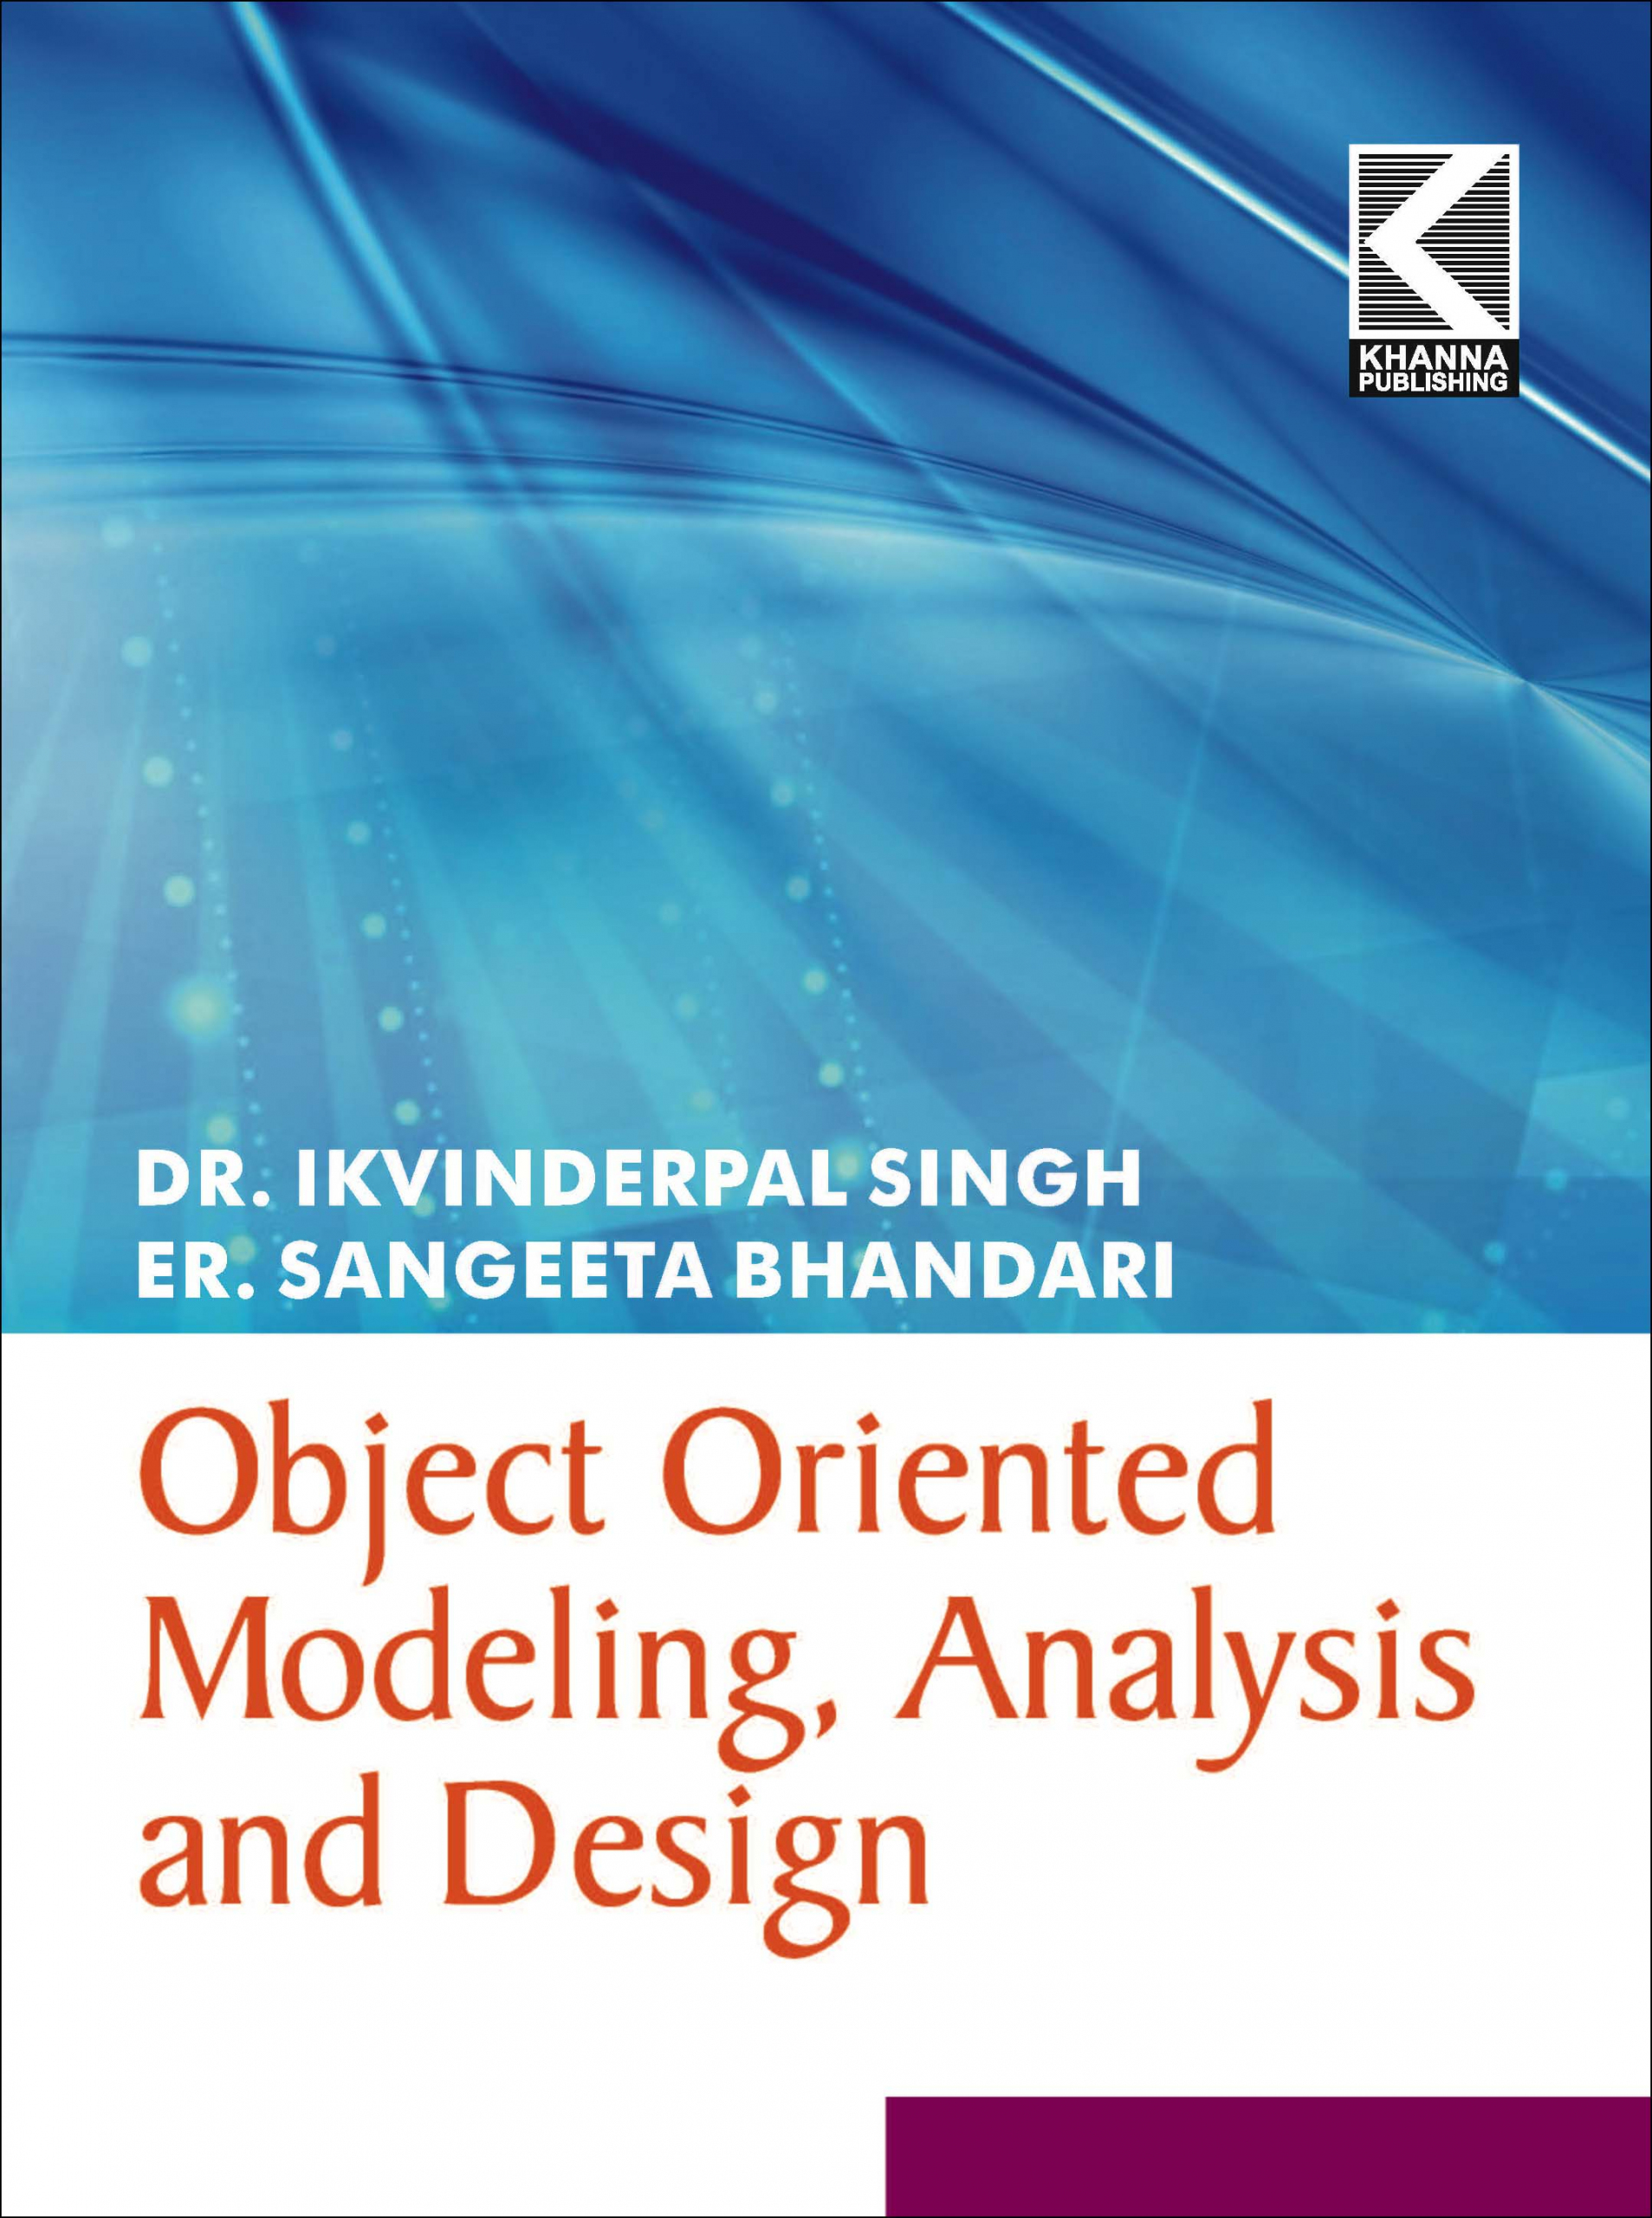 Object Oriented Modeling, Analysis and Design